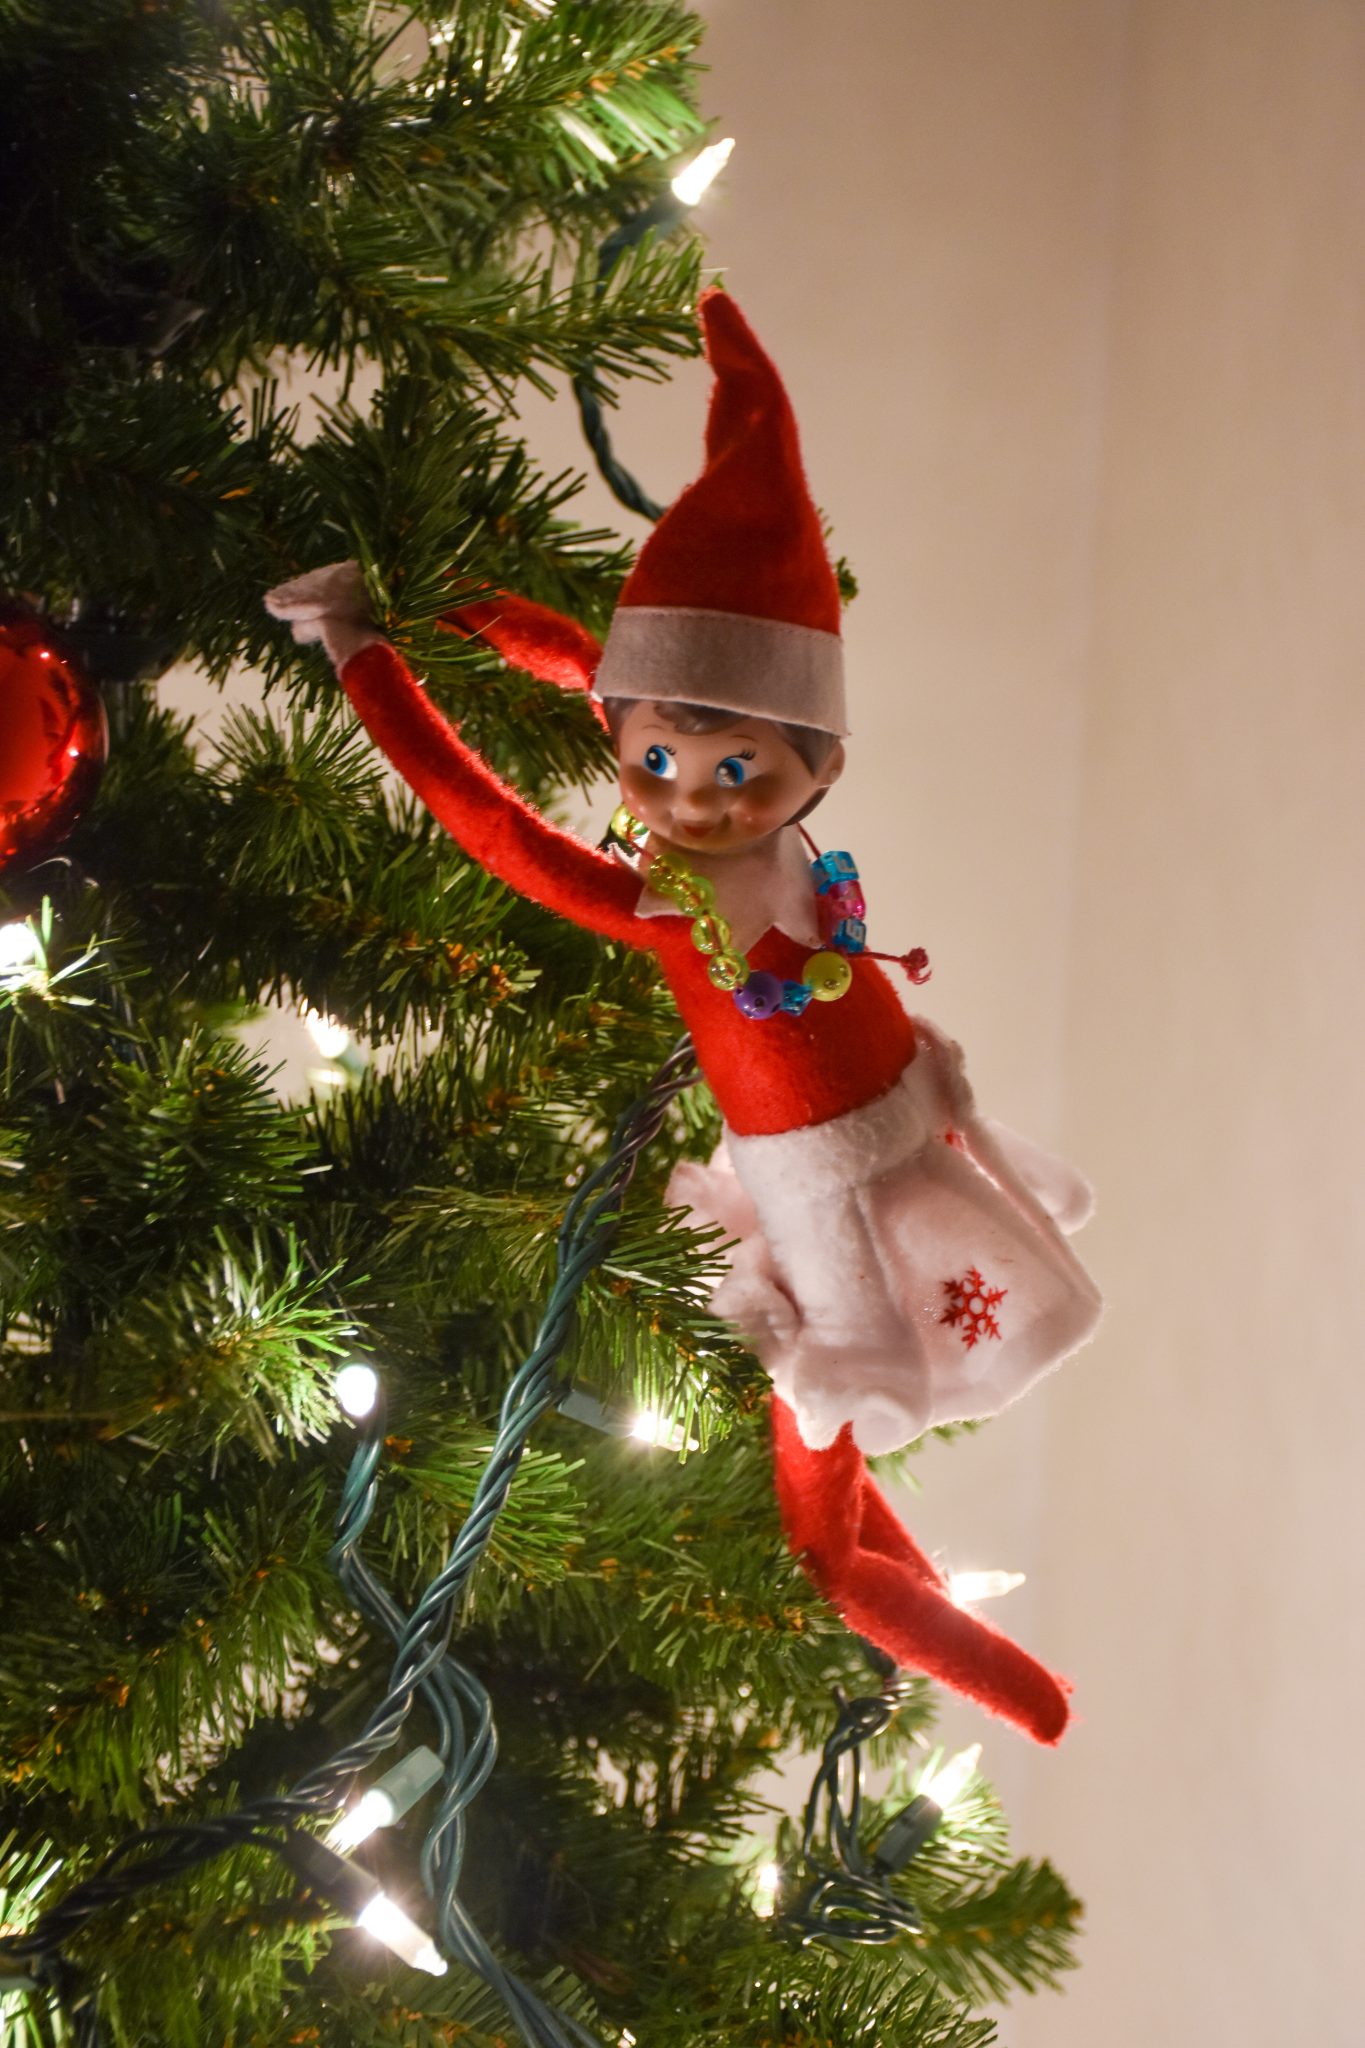 Elf on a shelf hanging from a Christmas tree